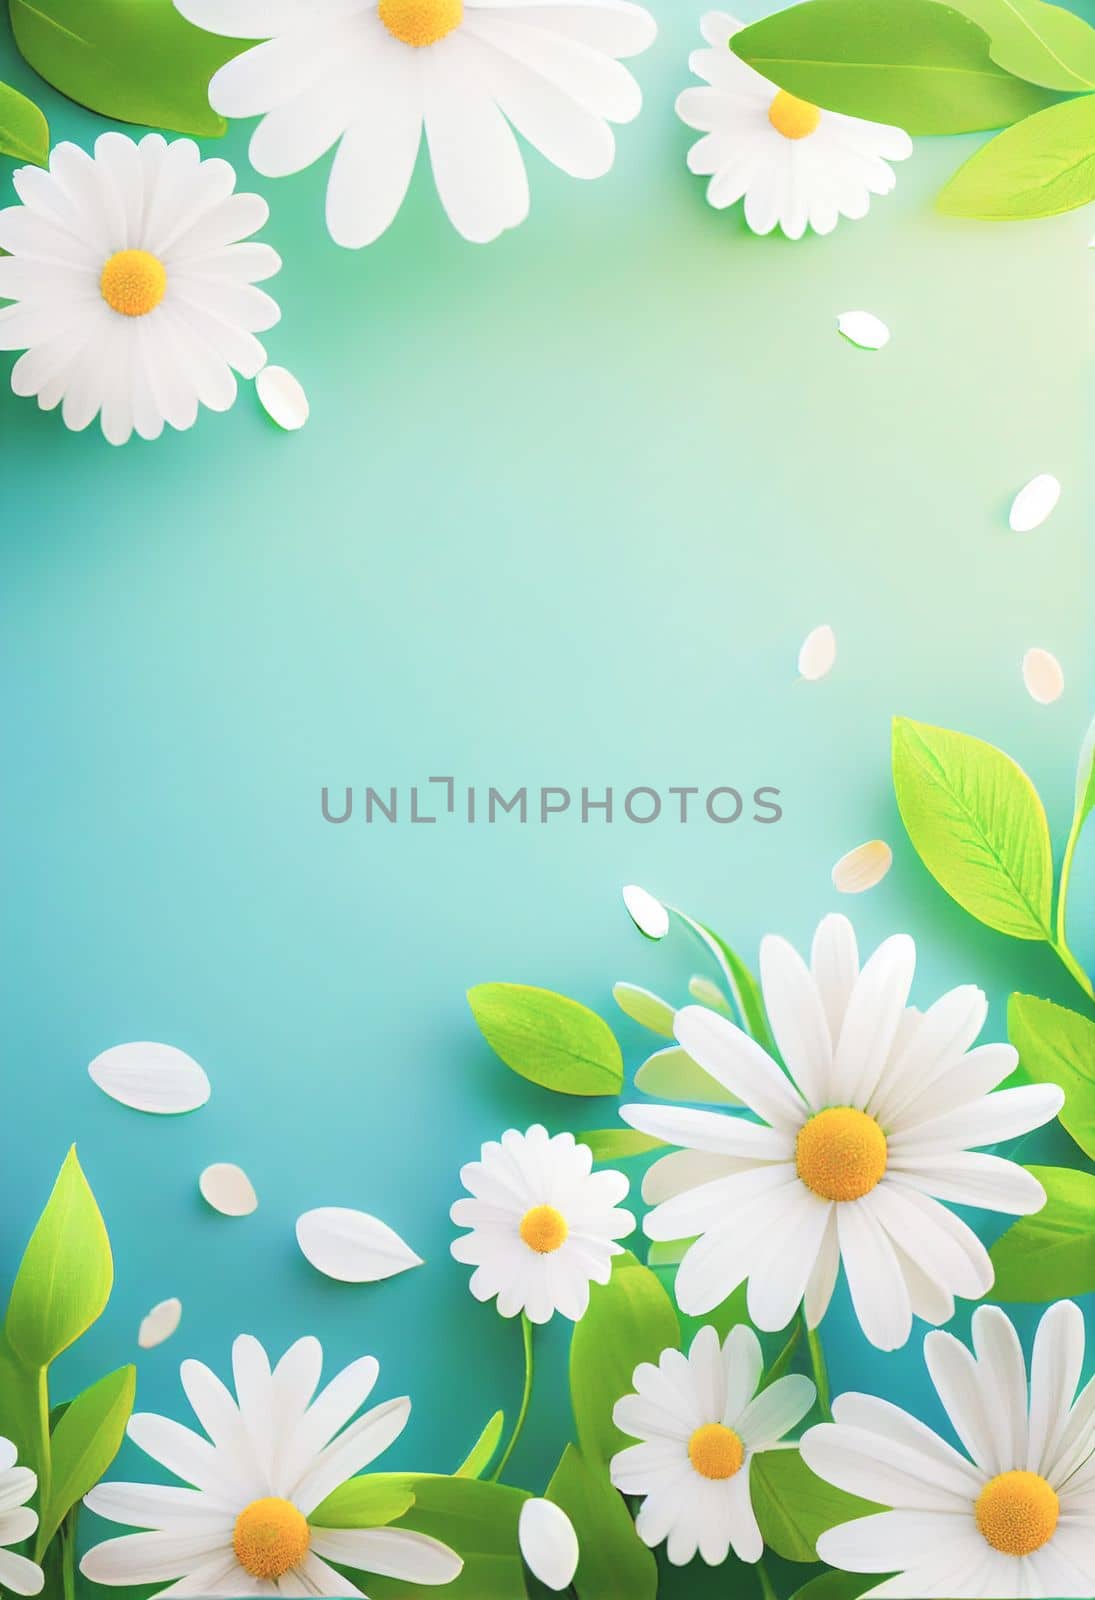 Sunny day background with daisies and leaves, copy space for your text. by FokasuArt